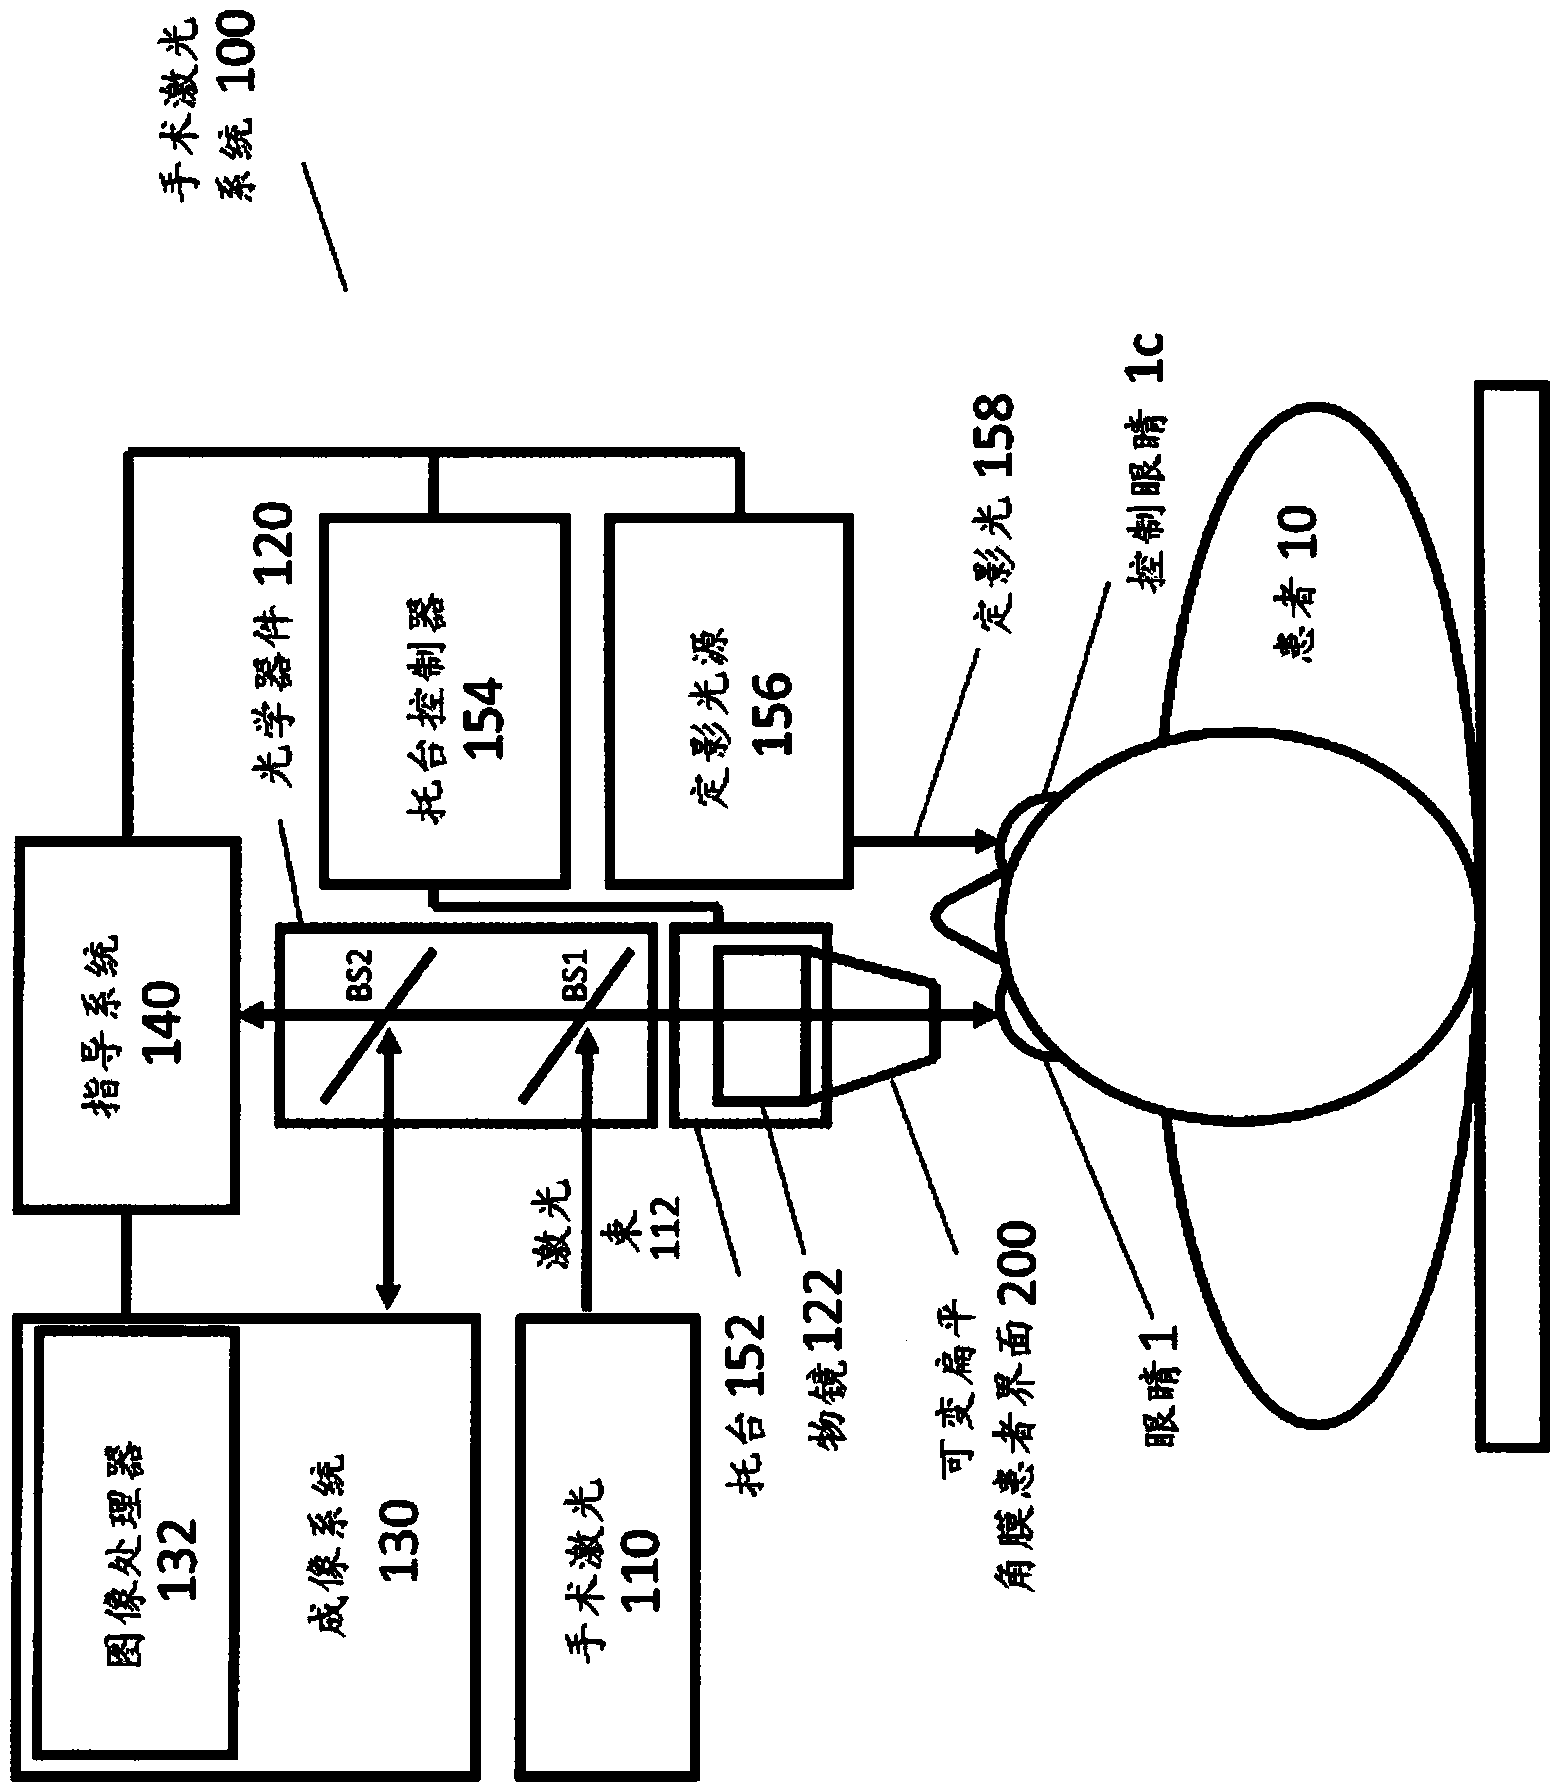 Patient interface with variable applanation